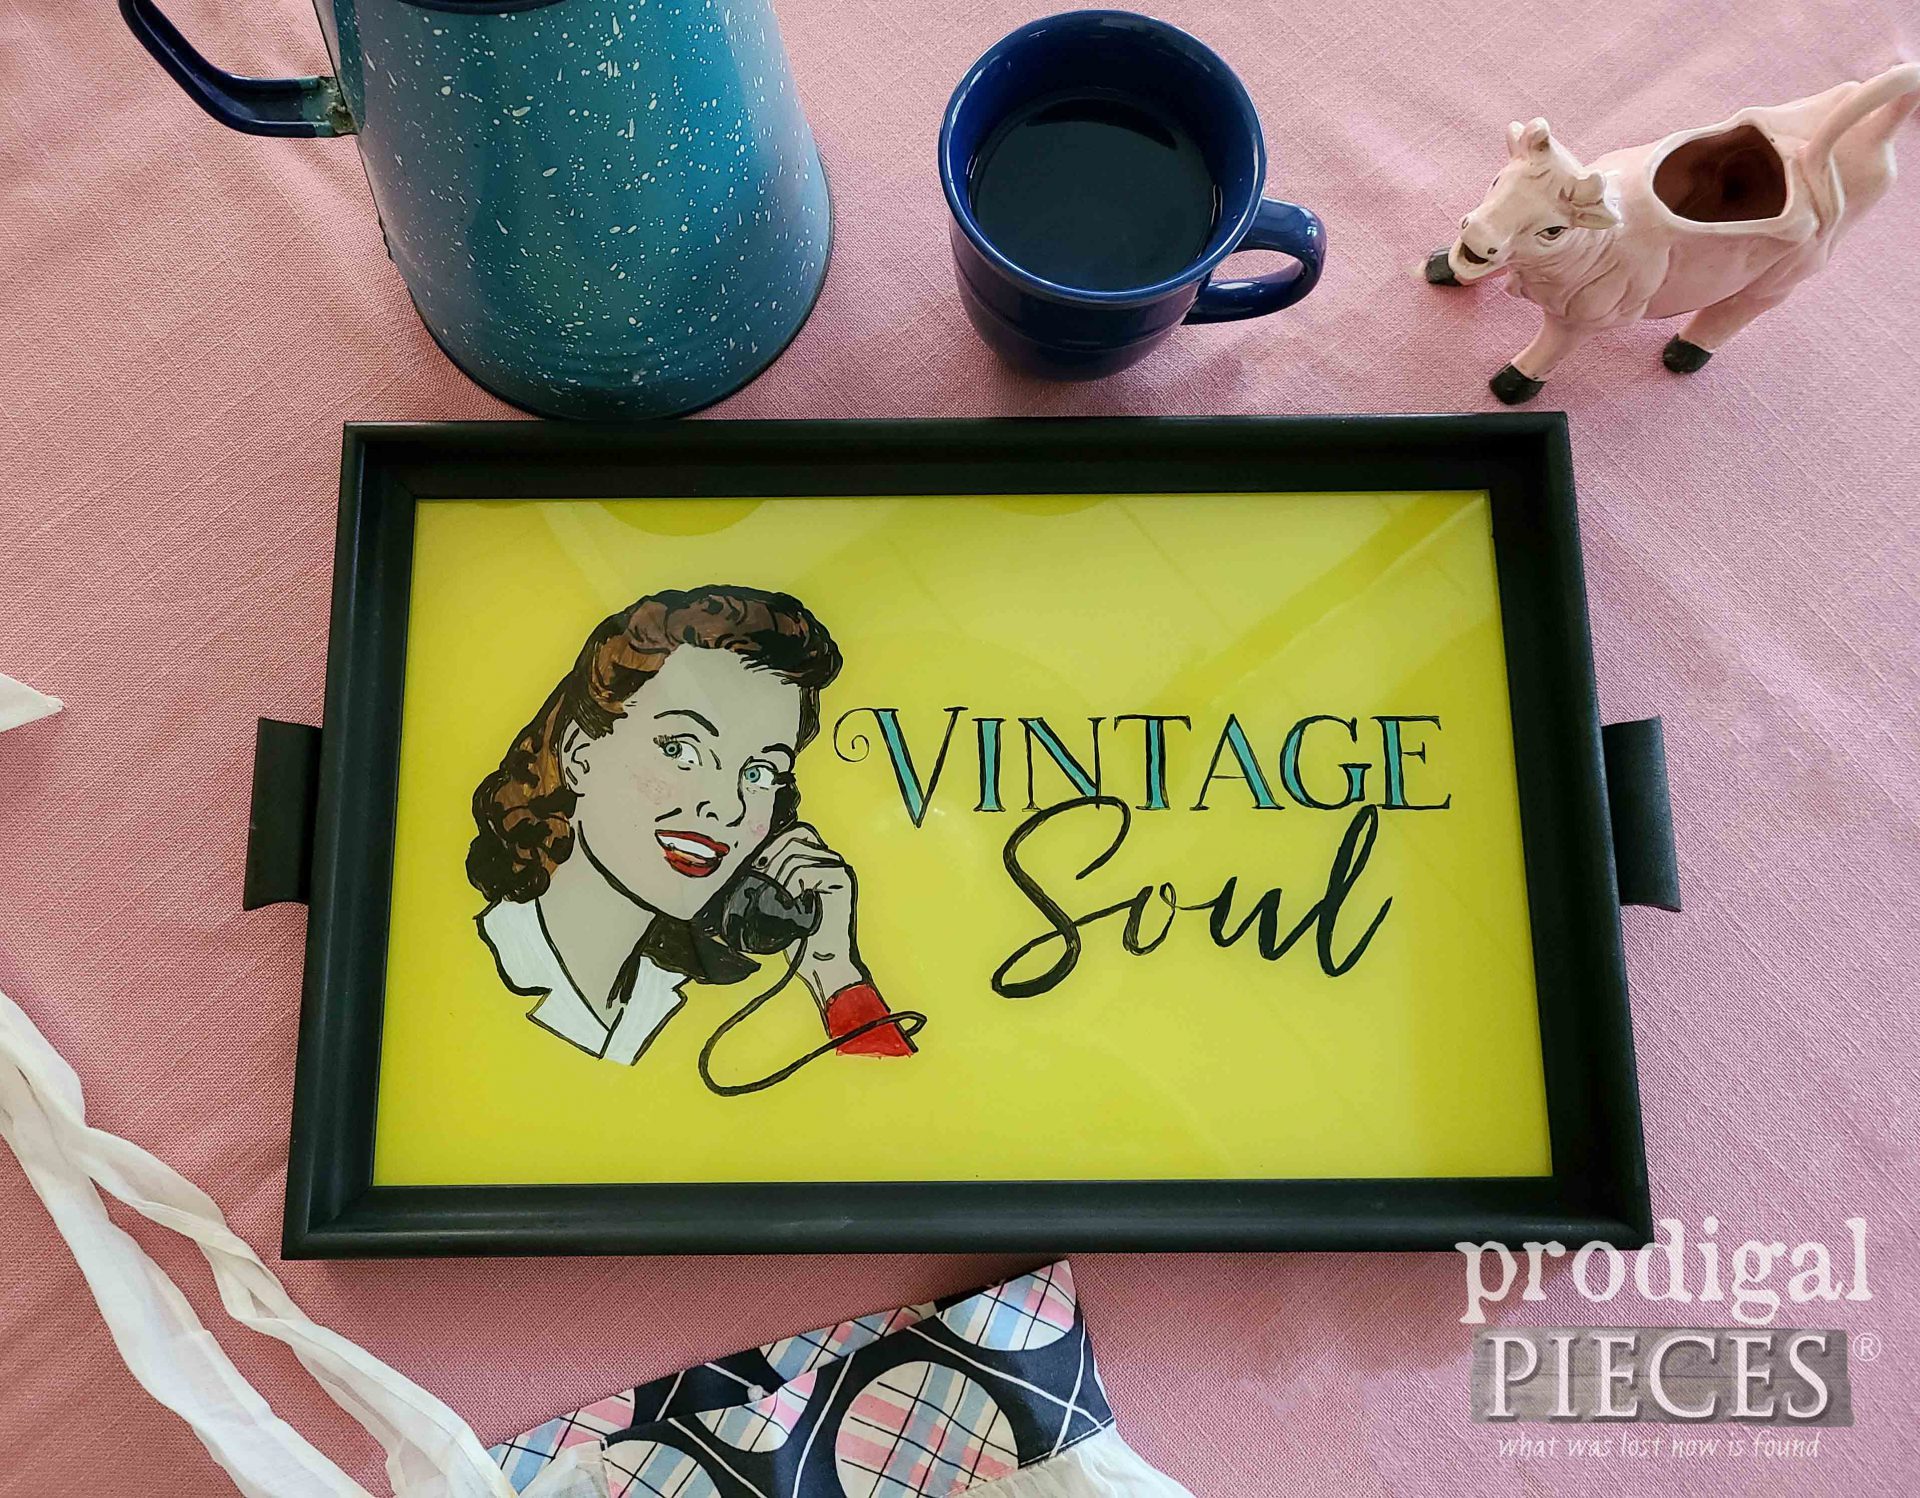 Vintage Soul Serving Tray with DIY Reverse Painting Tutorial by Larissa of Prodigal Pieces | prodigalpieces.com #prodigalpieces #vintage #retro #tray #home